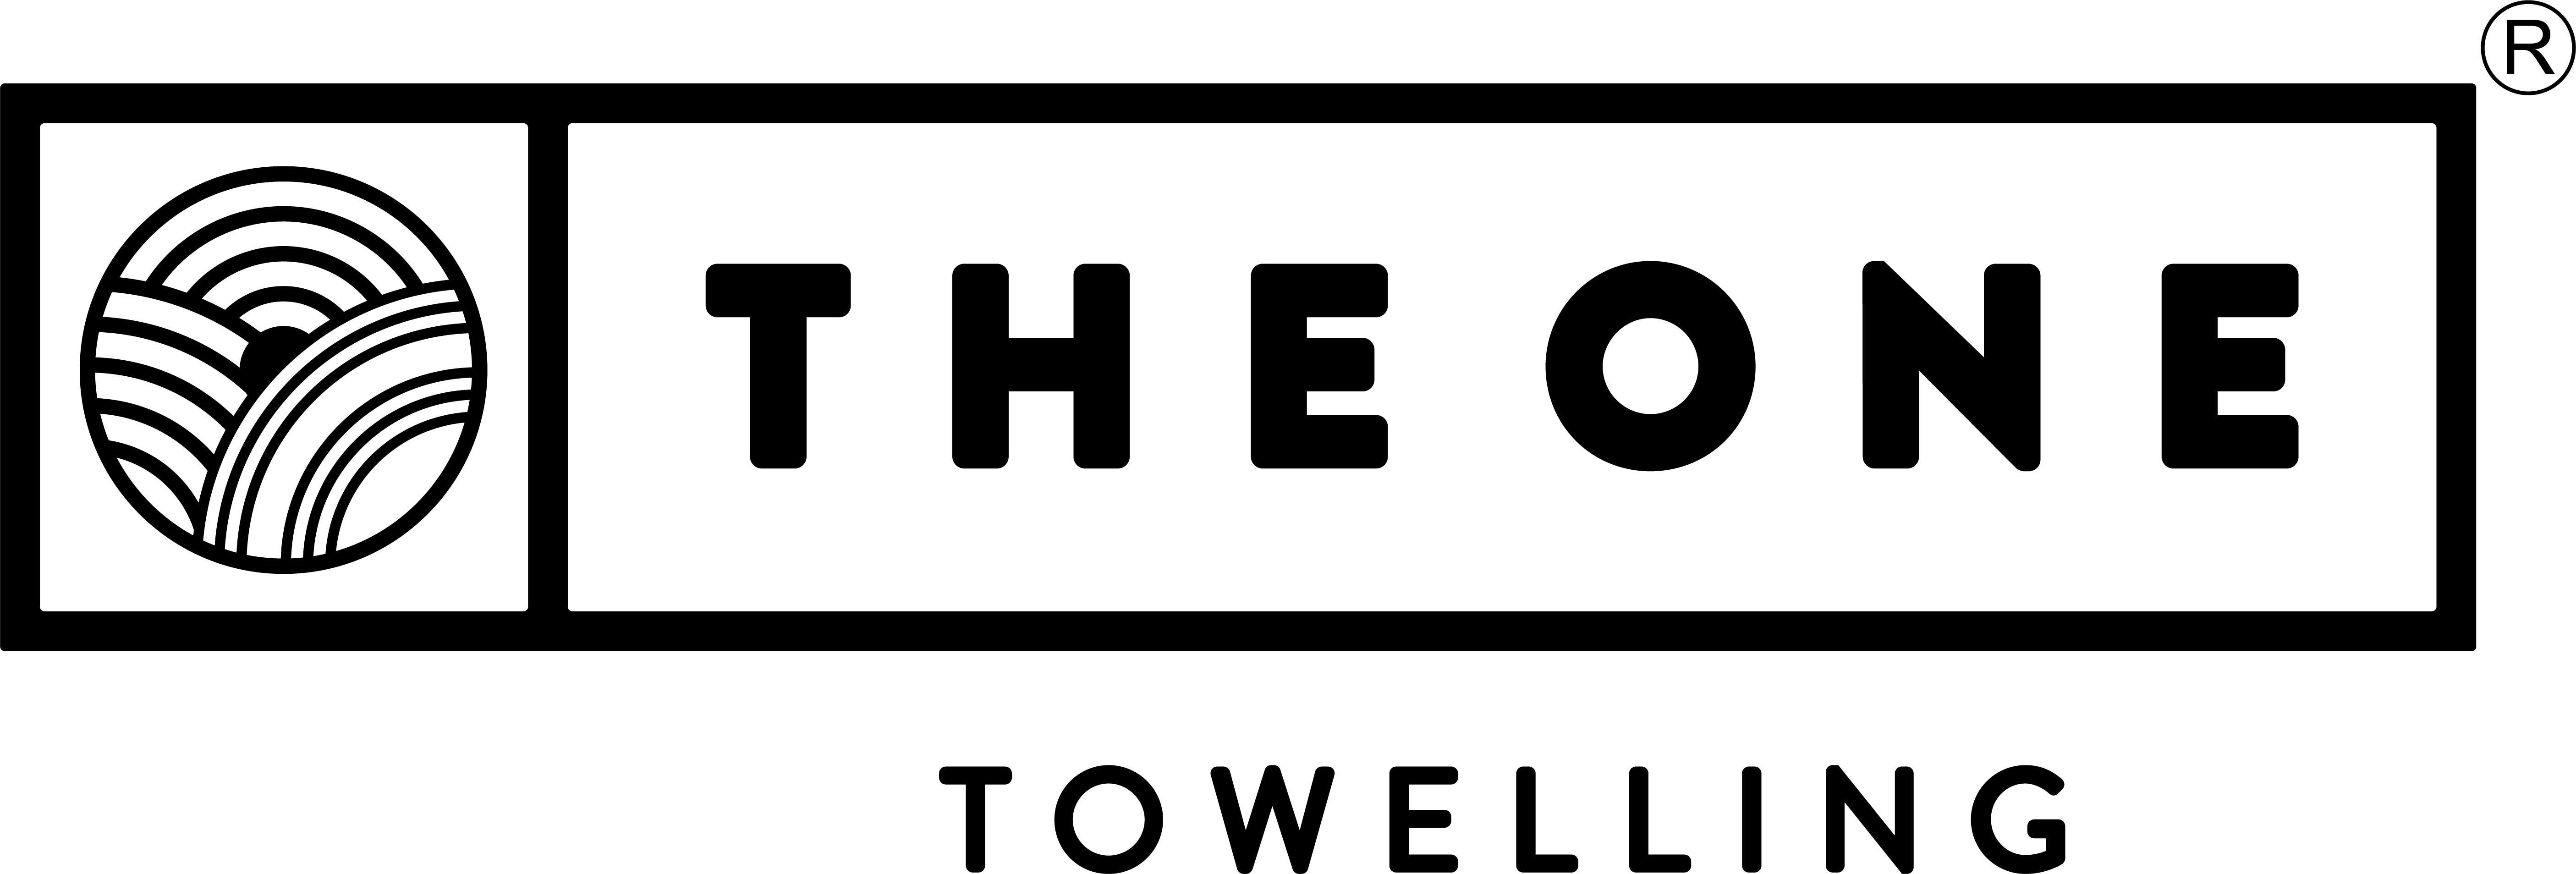 THE ONE TOWELLING